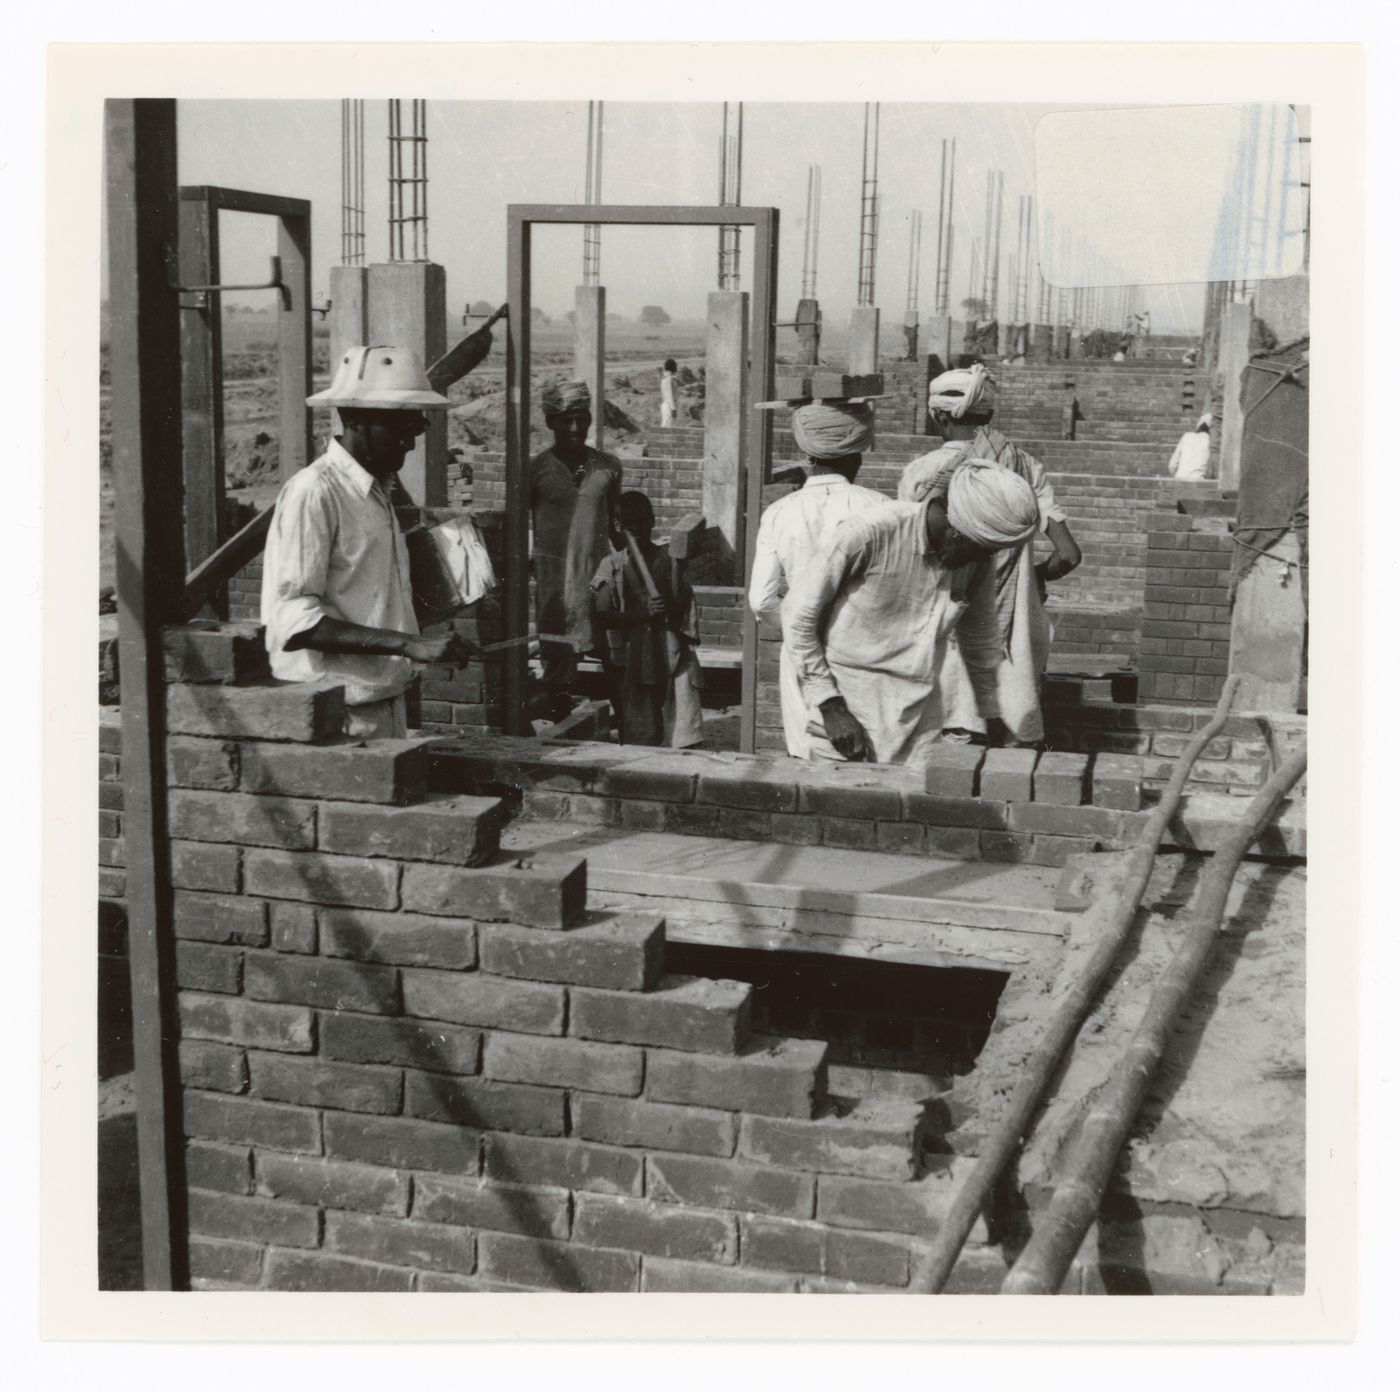 View of workers and houses under construction, Sector 22, Chandigarh, India